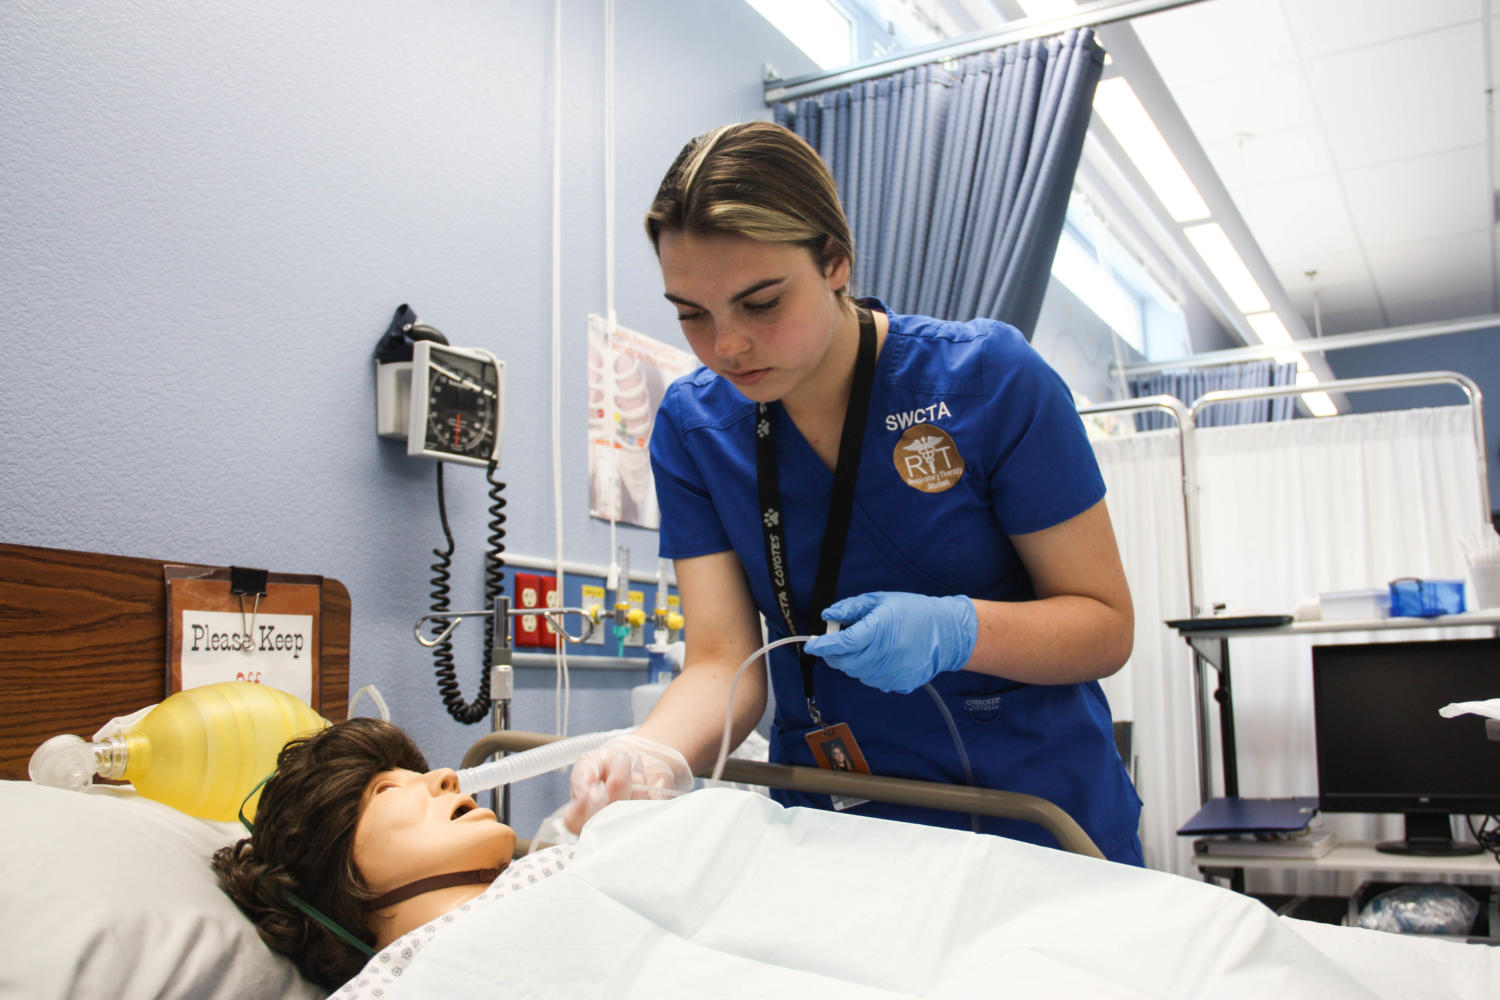 Junior Emily Giblin inserts a suctioning tube in the mannequin patient’s mouth. GIblin had to confirm with Respiratory Science teacher Vicki Smith that she was correctly helping the patient. “I have practiced suctioning, charting, and the basics of tracheotomy care many times,” Giblin said. “Now I feel I have it seared in my head.”